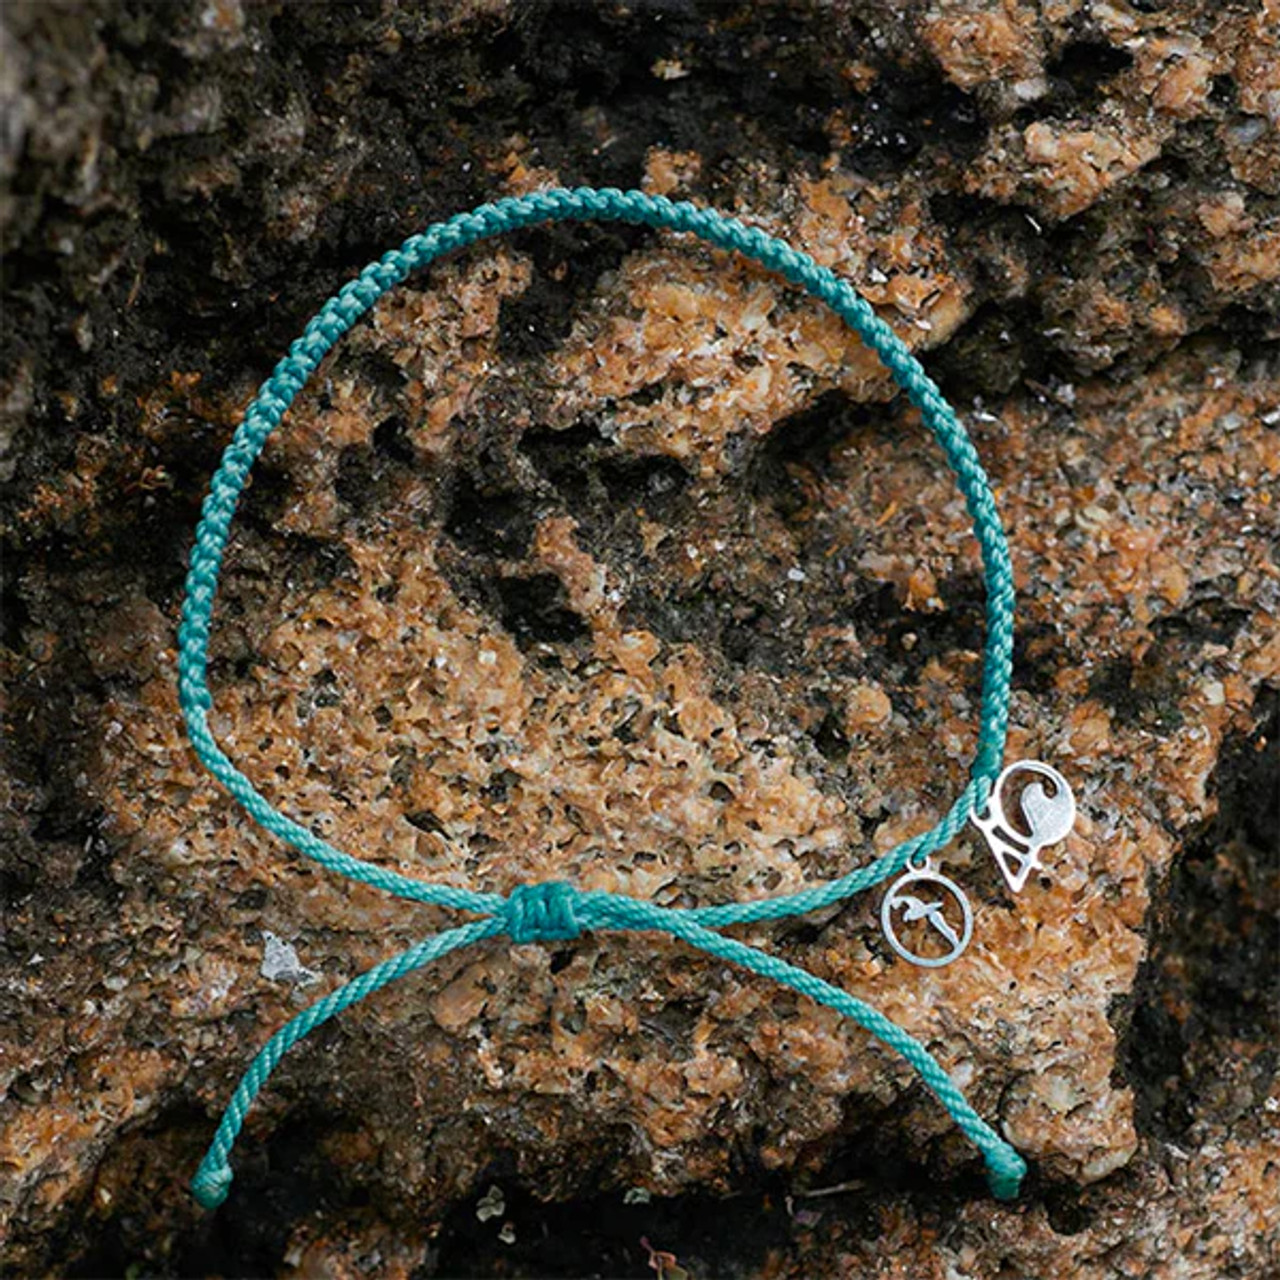 4ocean Limited Edition Braided Bracelet - Blue - Capped Petrel